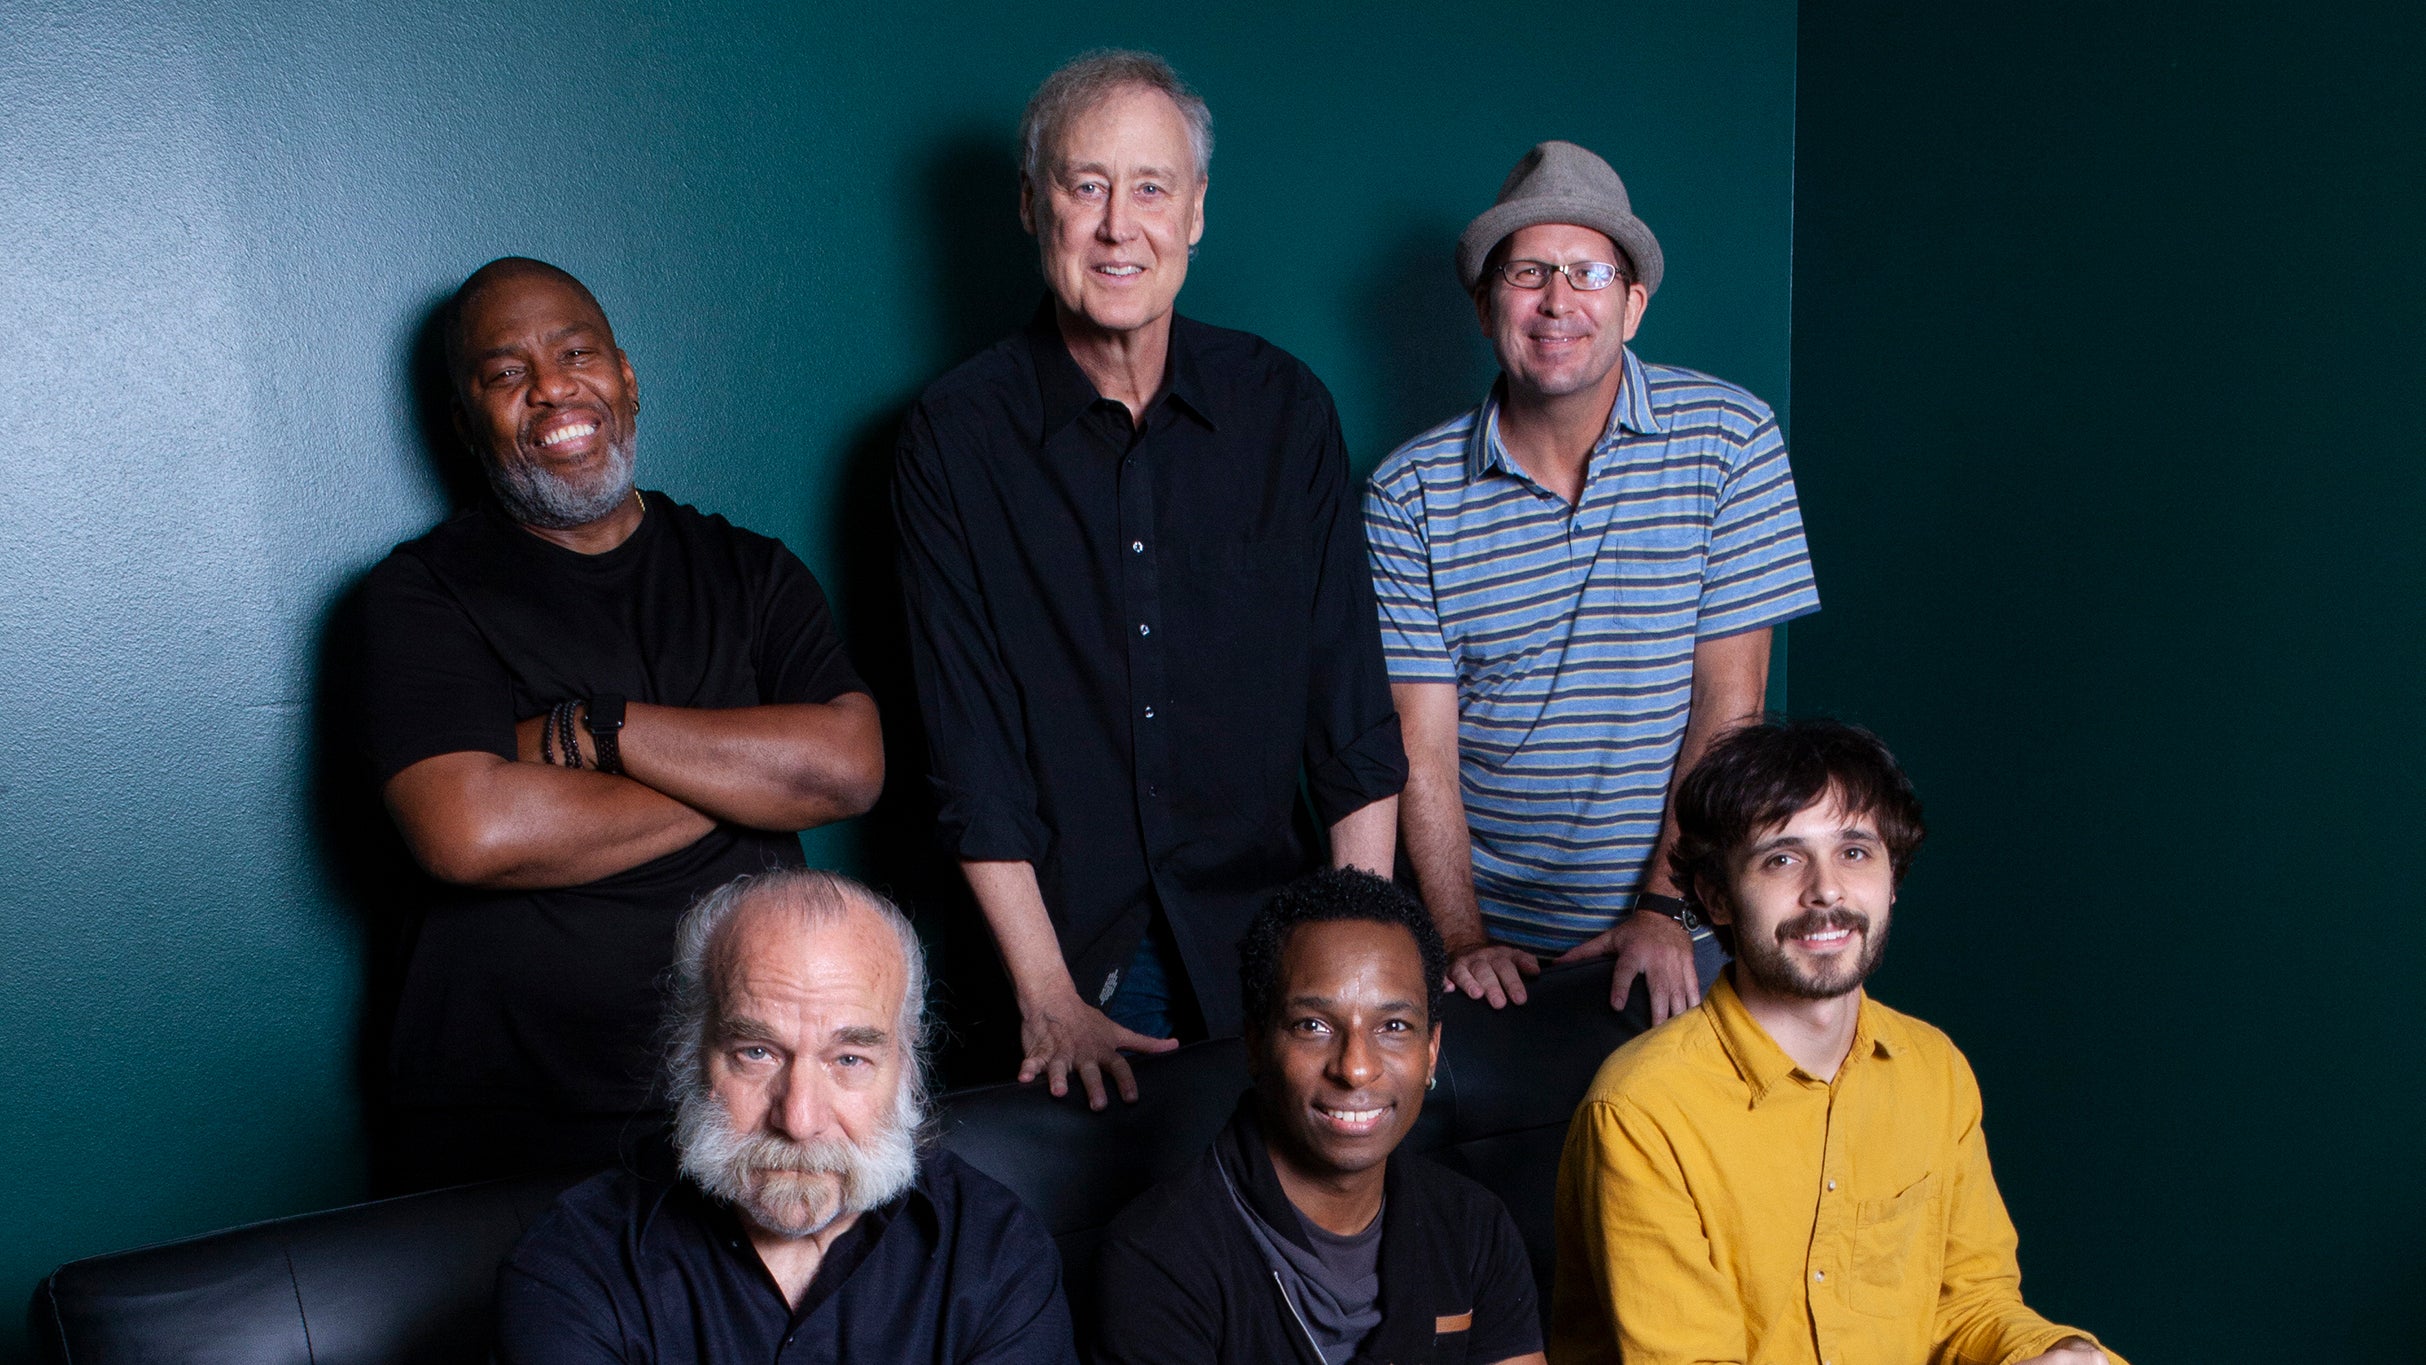 Bruce Hornsby & the Noisemakers at Goodyear Theater